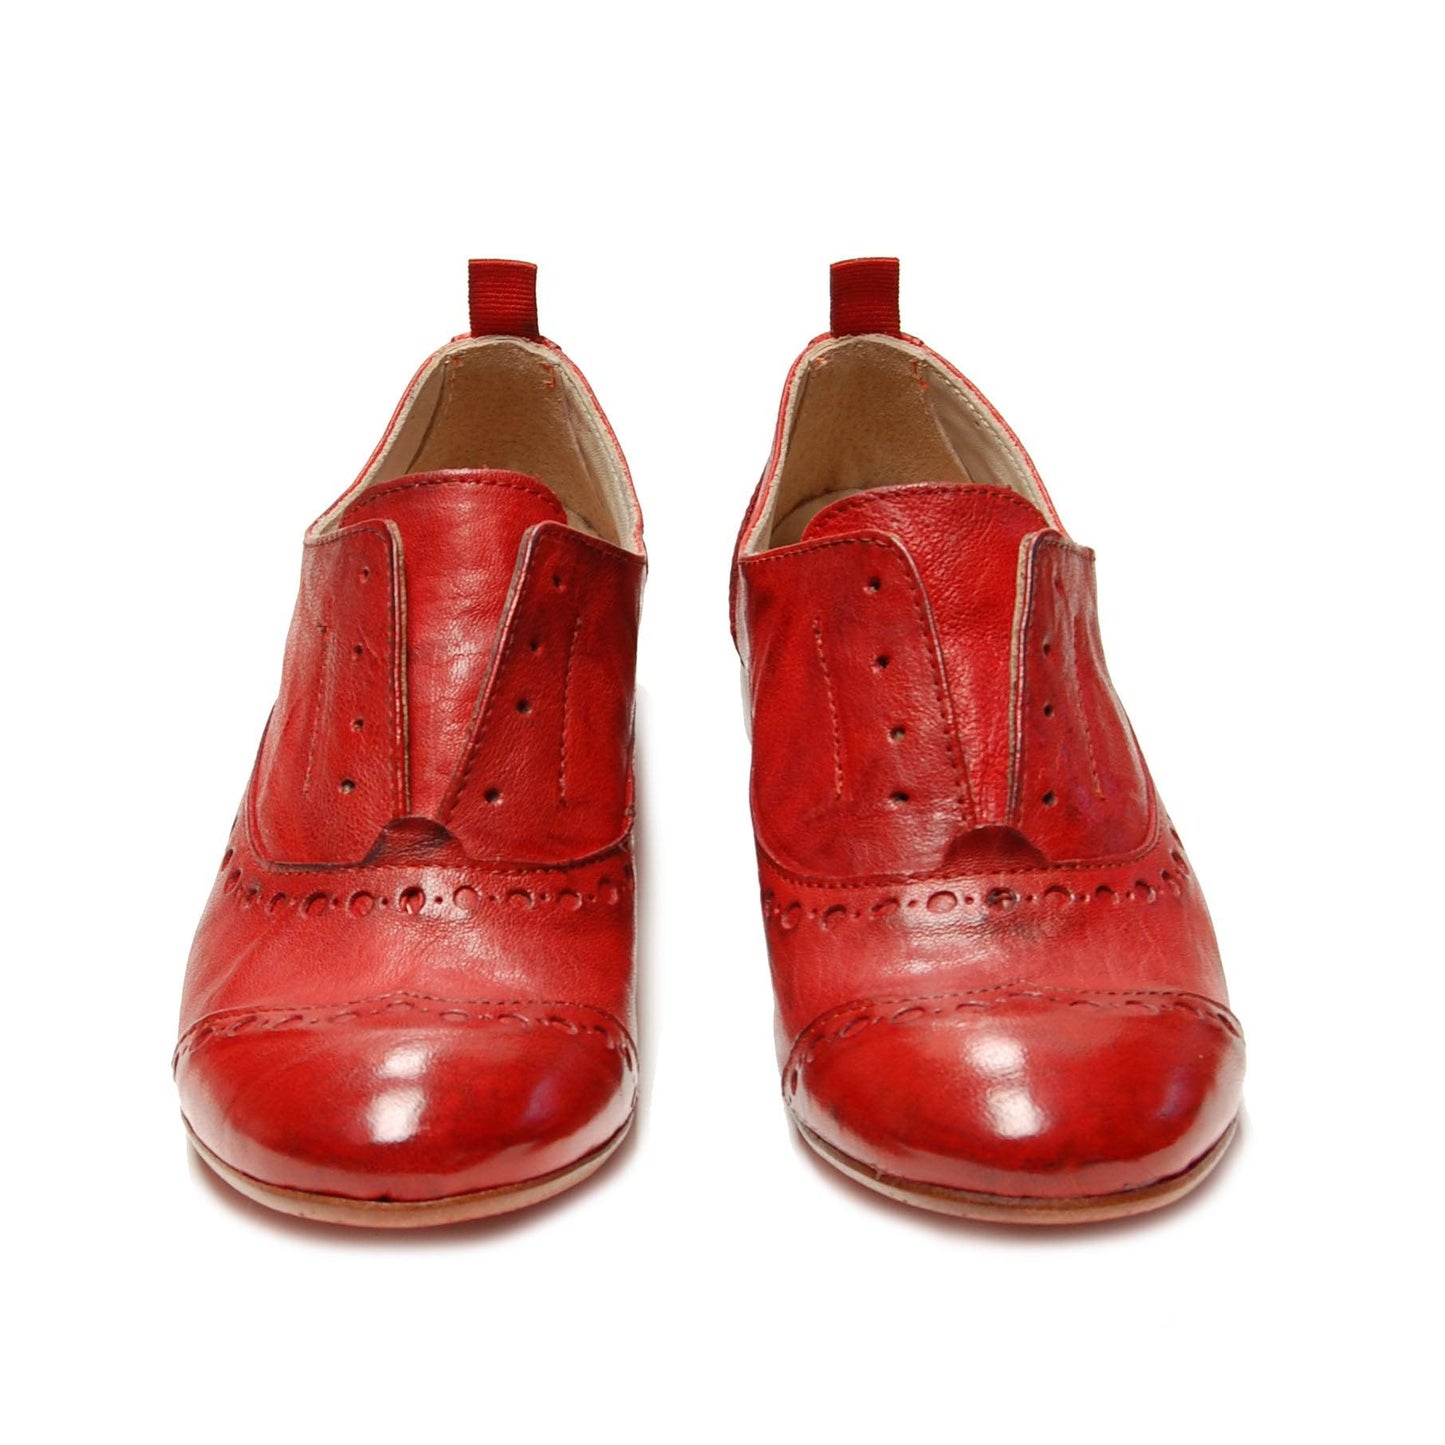 GIUSY 070 - Texas Leather SHOES RED CURRANT - History541